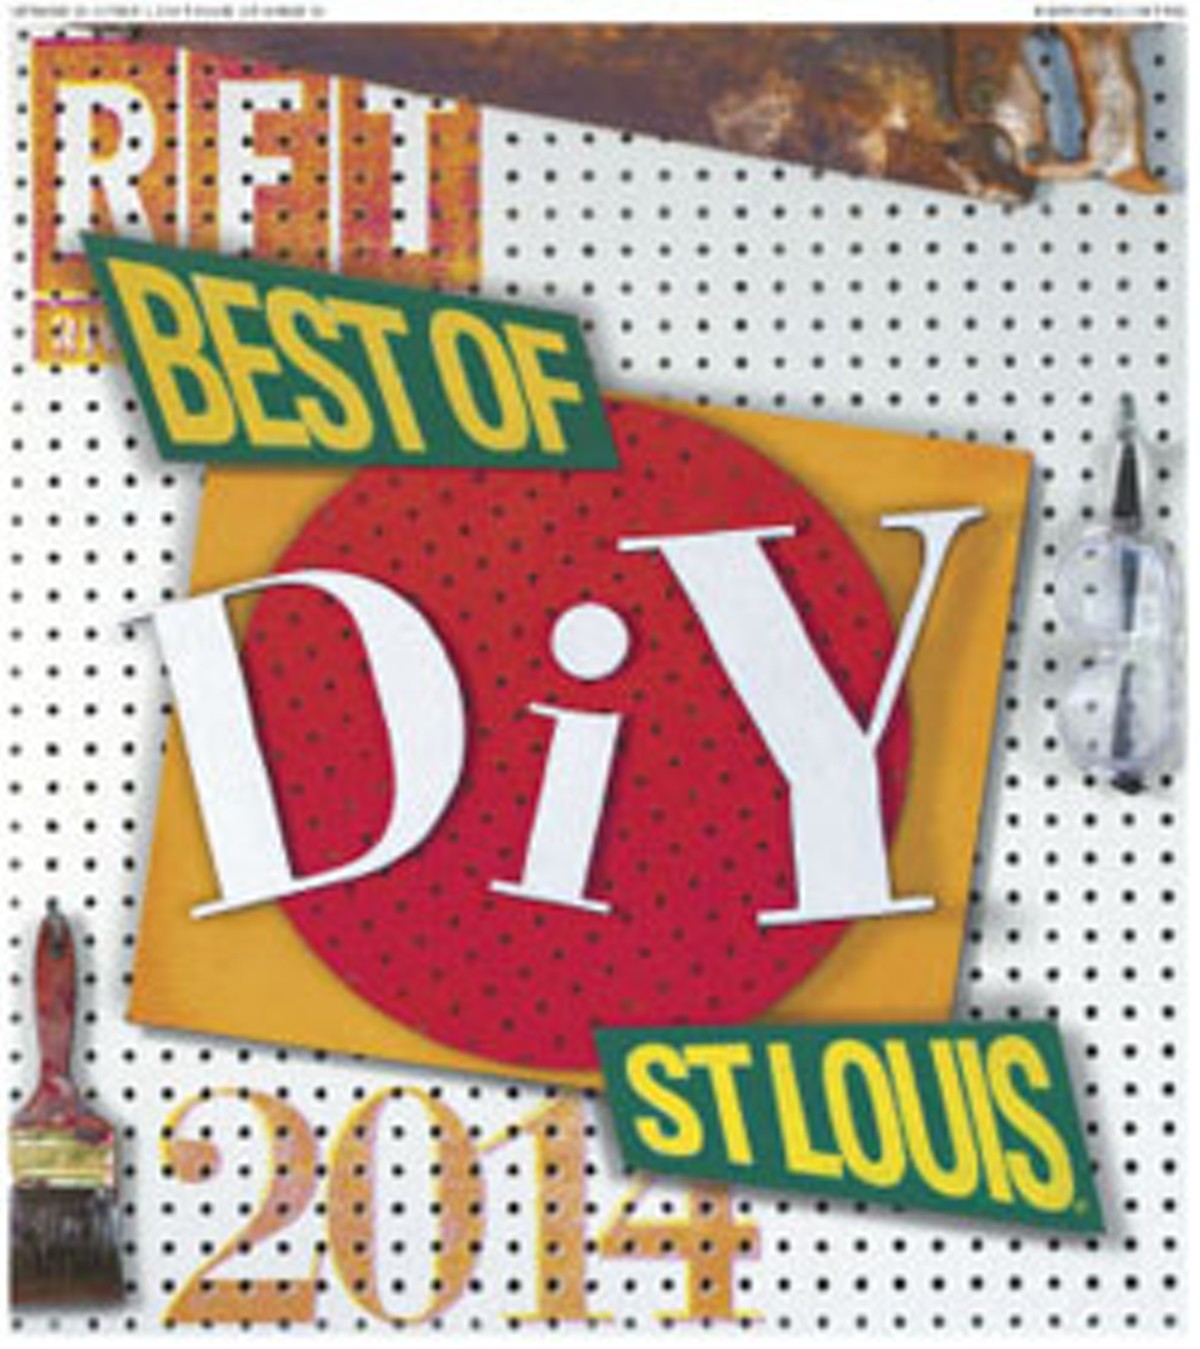 Best of St. Louis 2014 Issue Cover